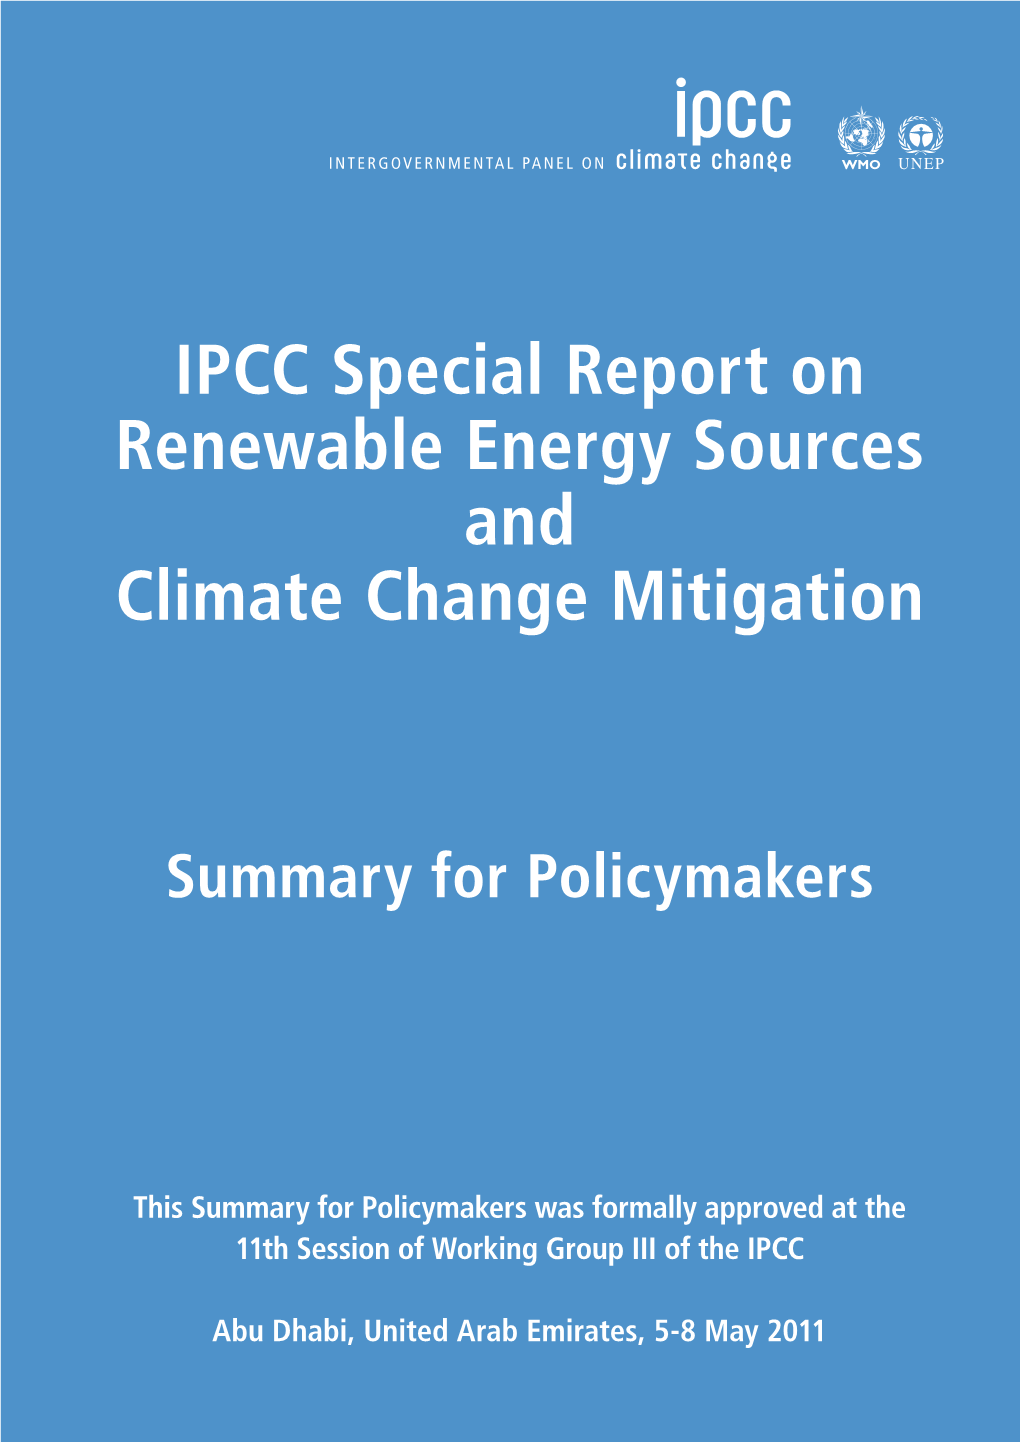 IPCC Special Report on Renewable Energy Sources and Climate Change Mitigation